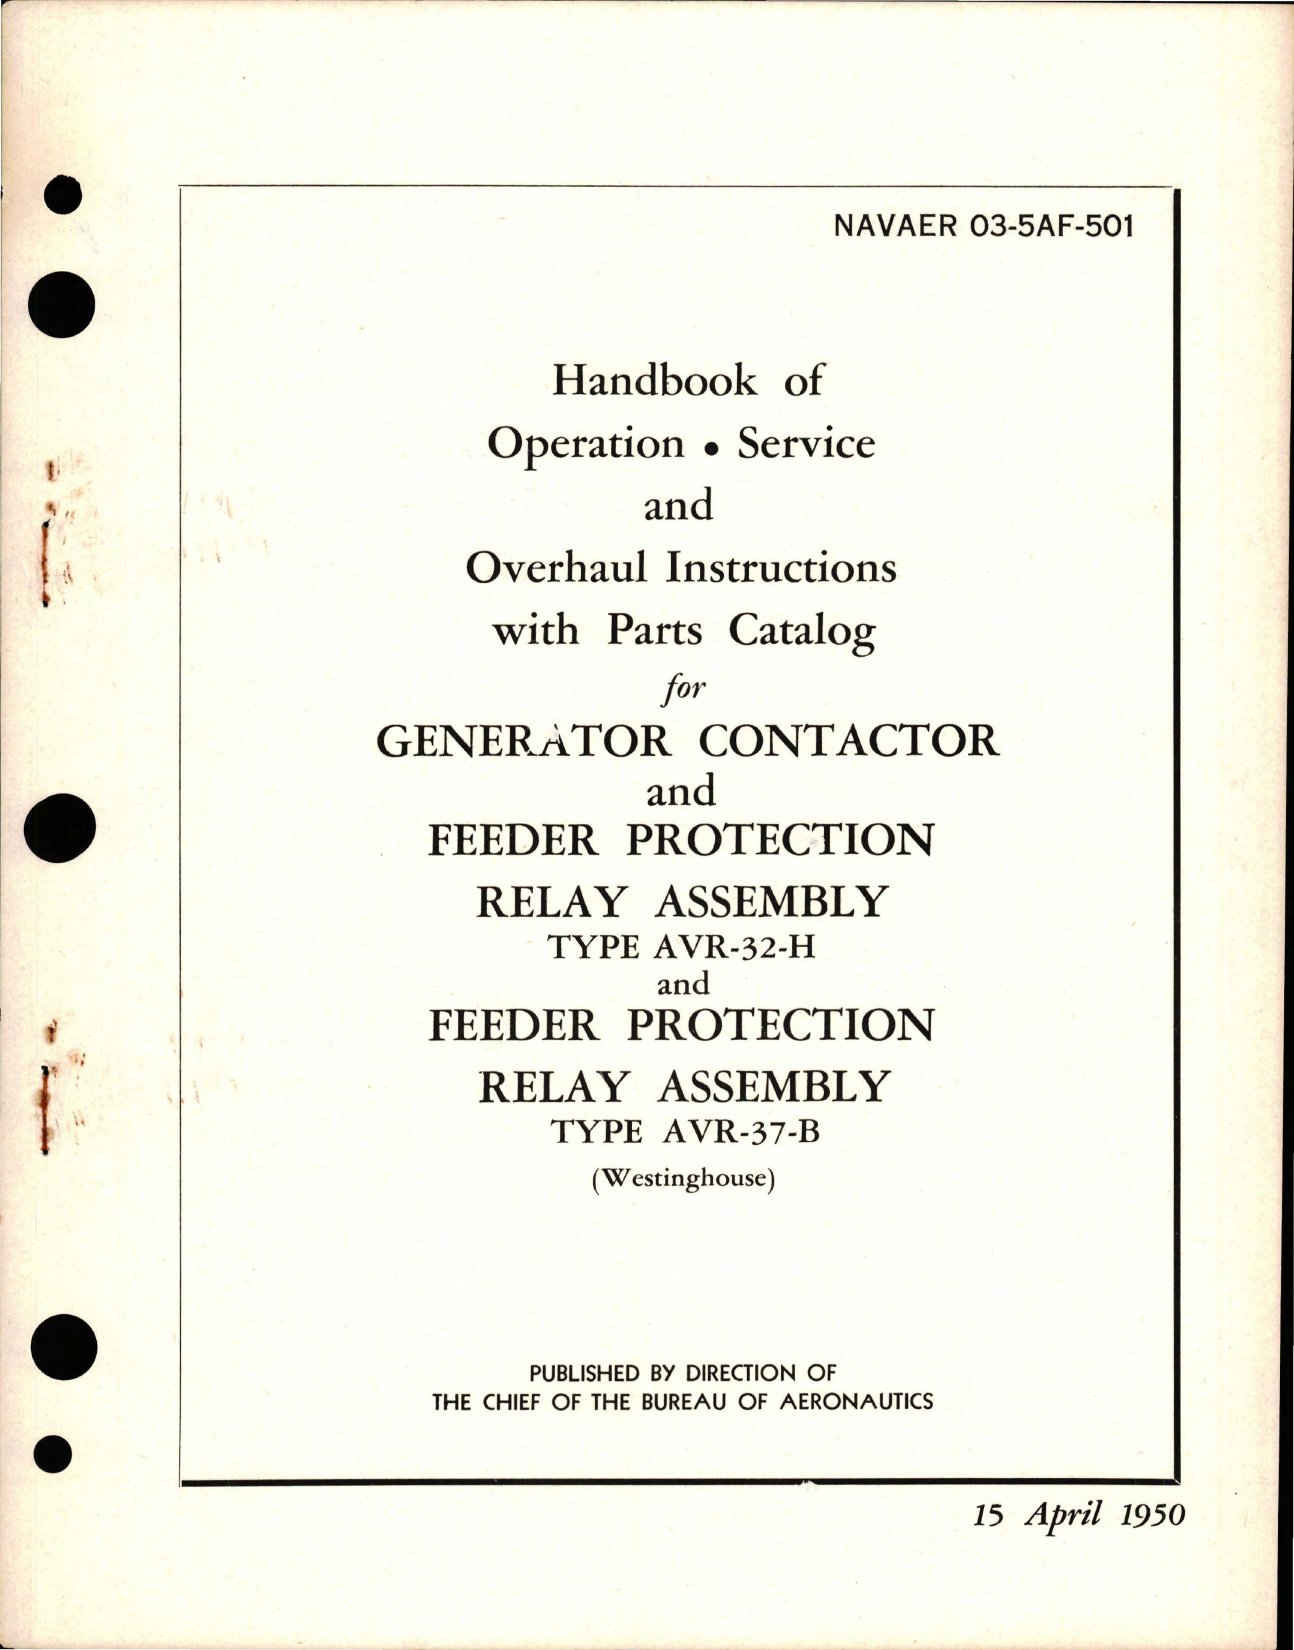 Sample page 1 from AirCorps Library document: Operation, Service and Overhaul Instructions with Parts Catalog for Generator Contractor and Feeder Protection Relay Assembly